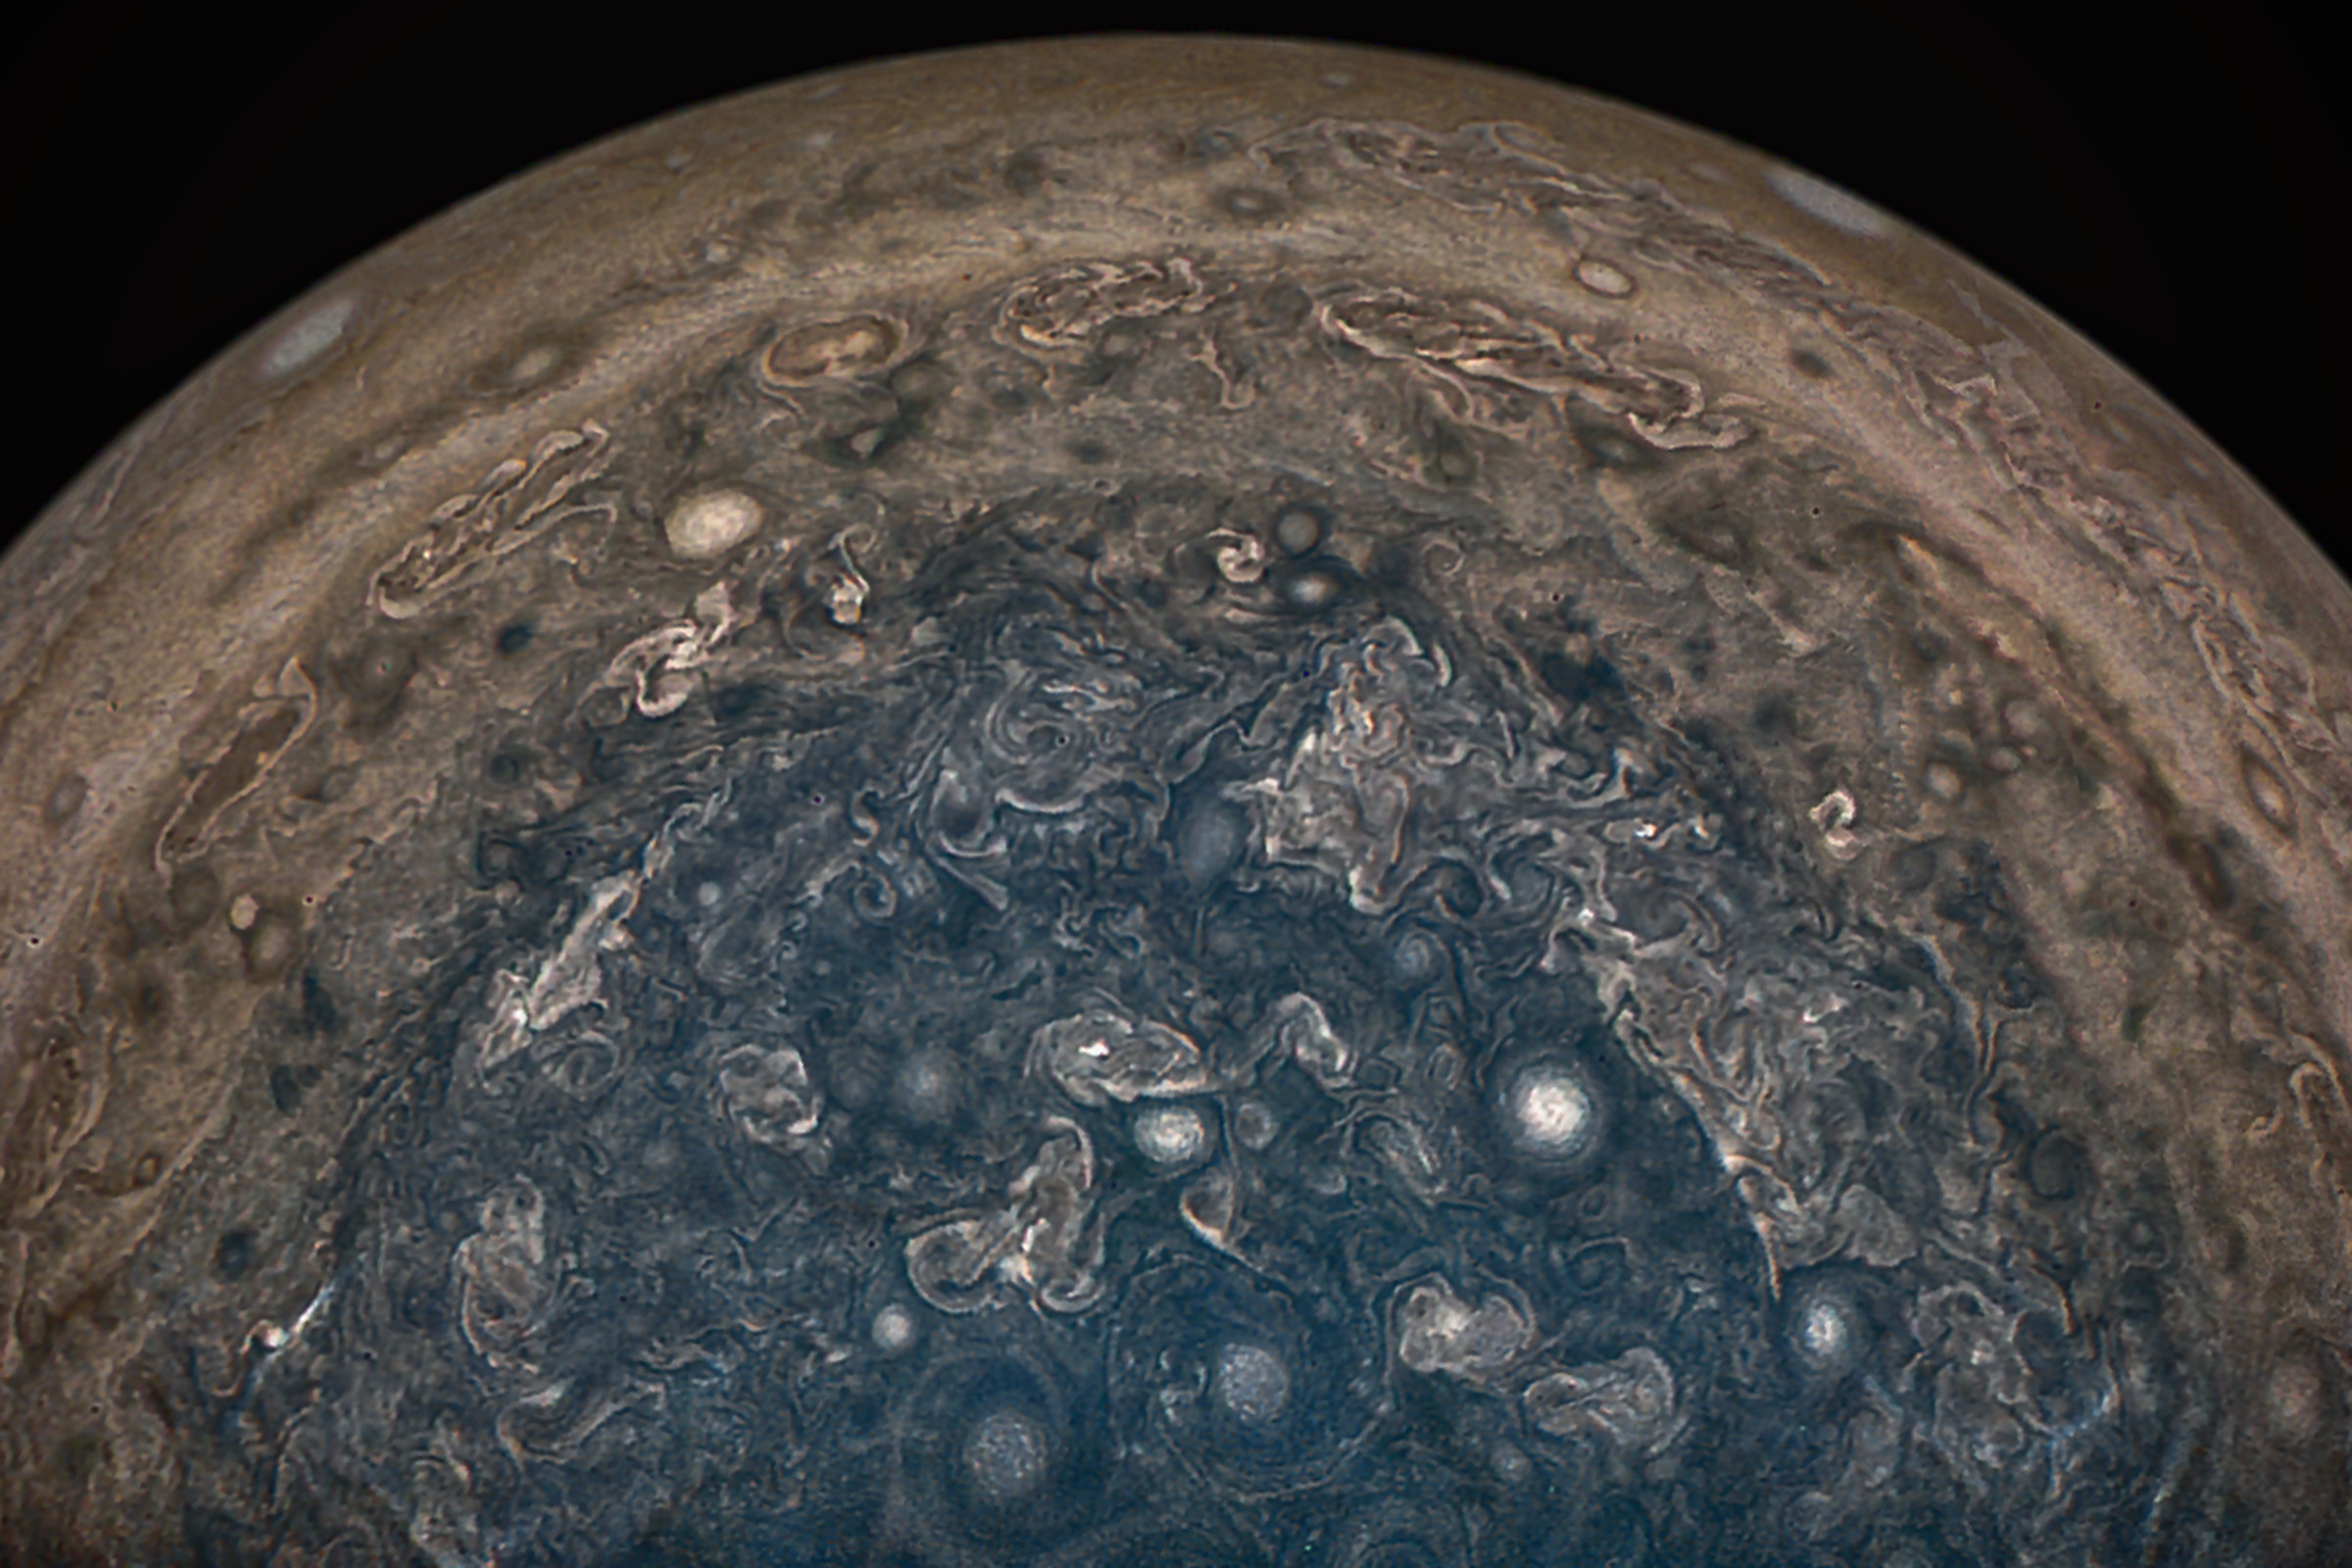 The storms at Jupiter’s poles, as seen by NASA’s Juno spacecraft.